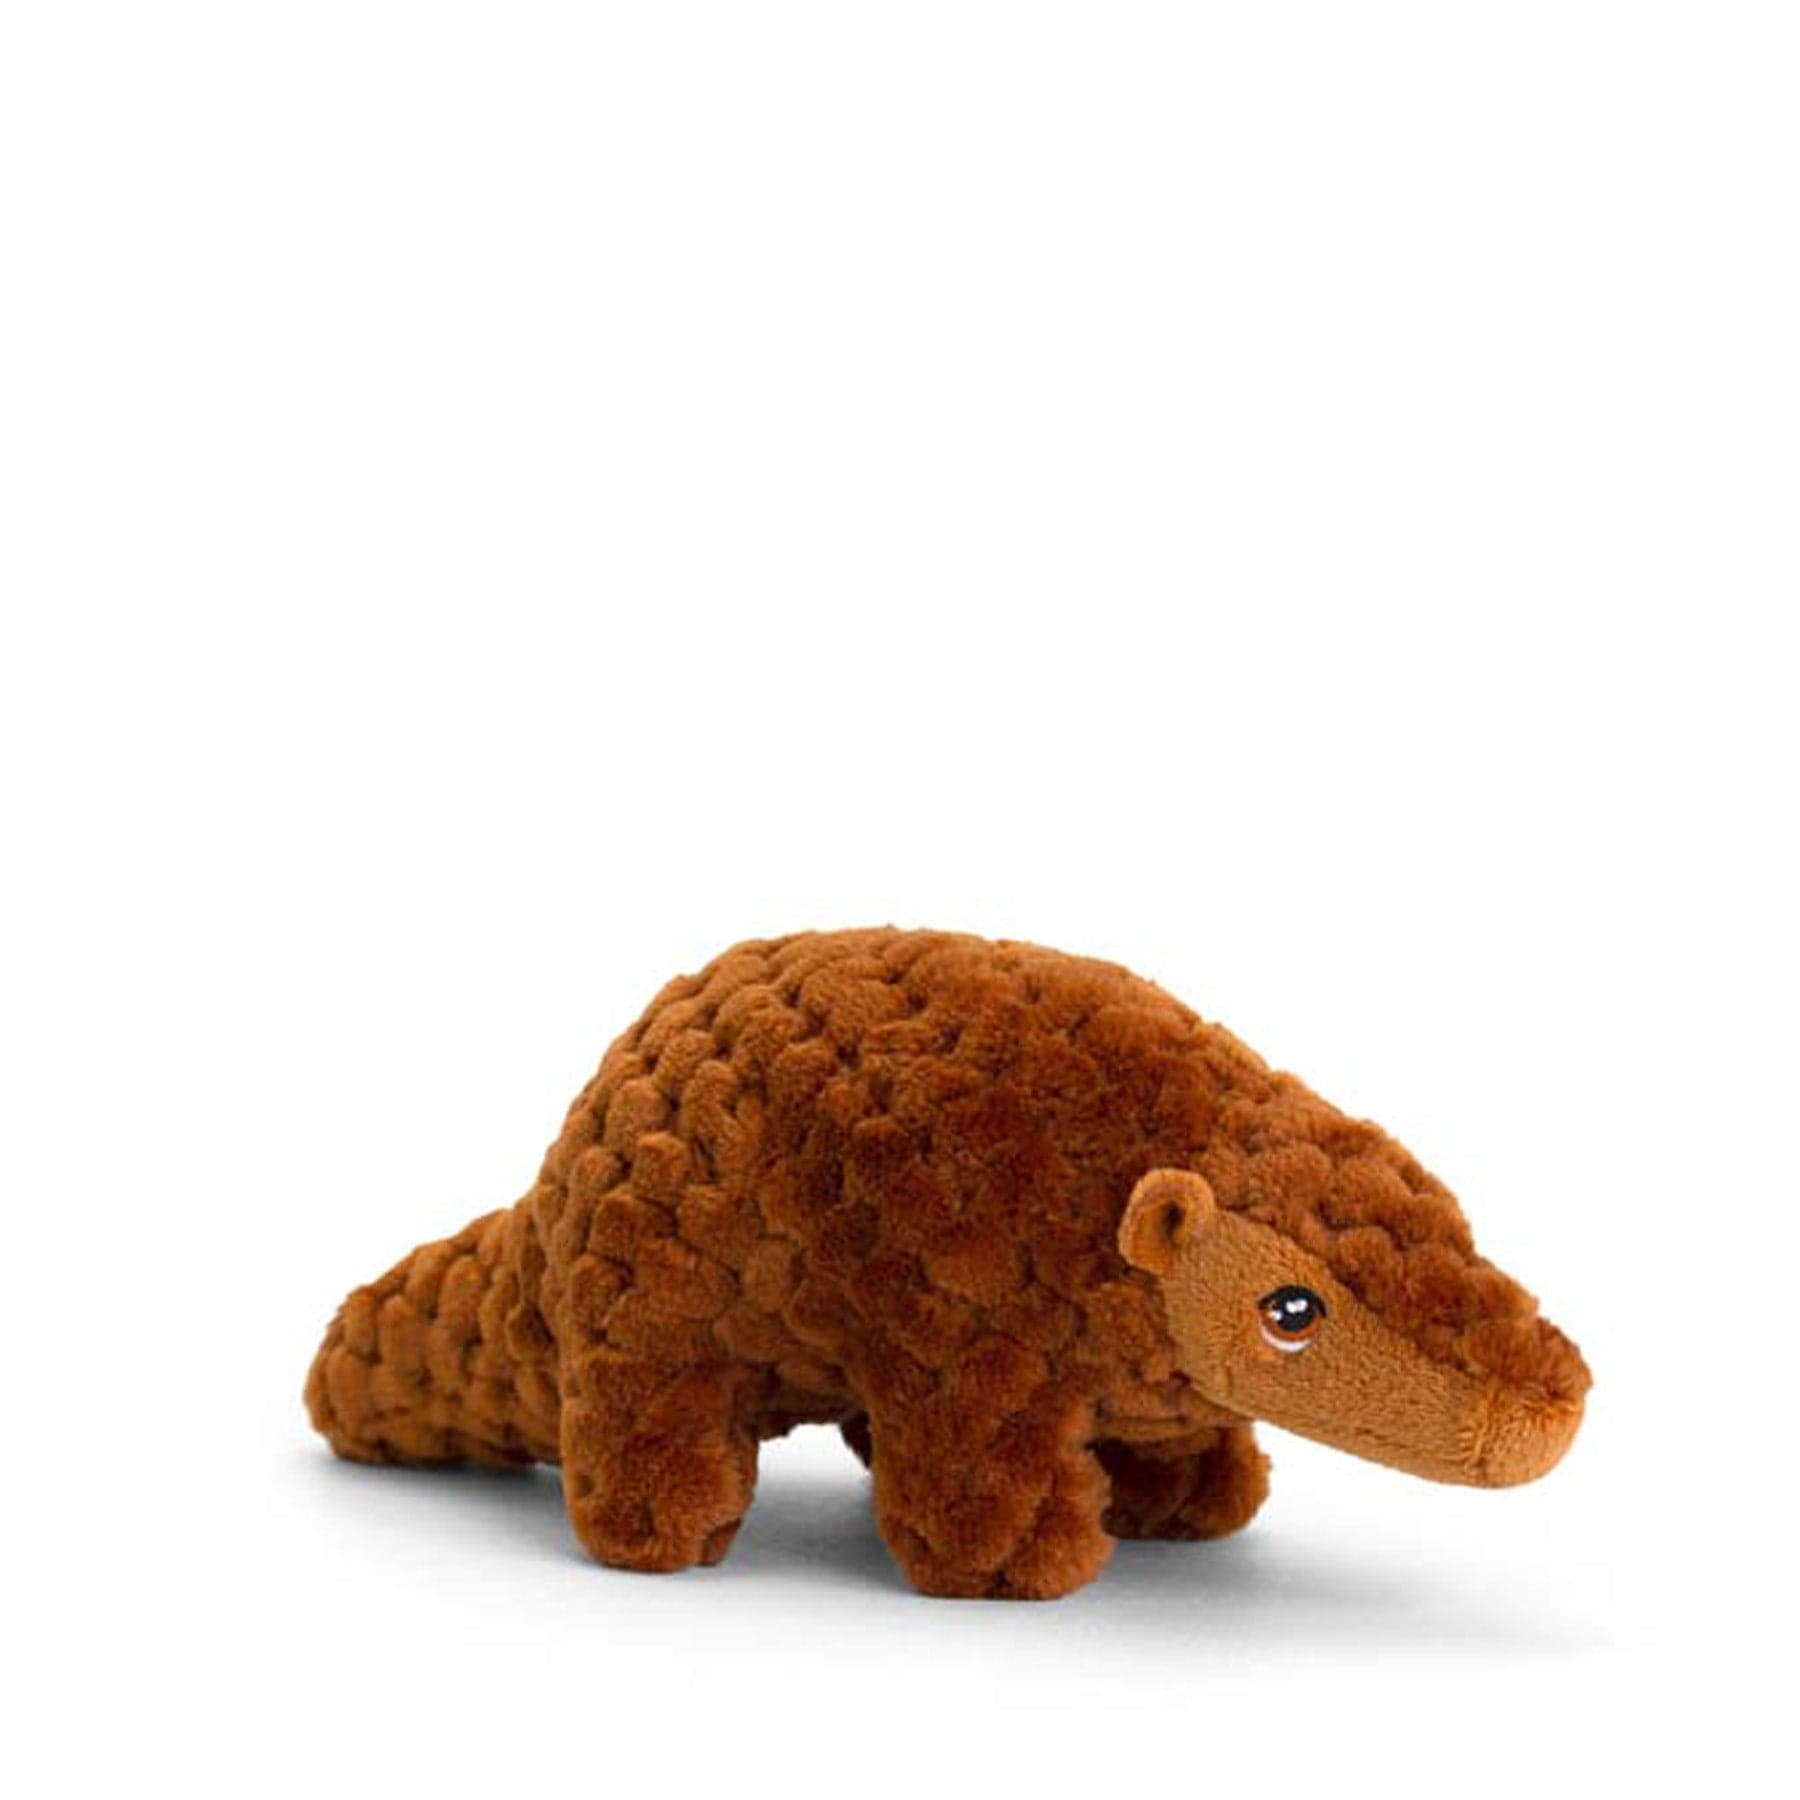 Brown plush anteater toy isolated on white background, soft stuffed animal for kids, cute ant-eating mammal replica, realistic plaything, children's room decor, educational wildlife toy